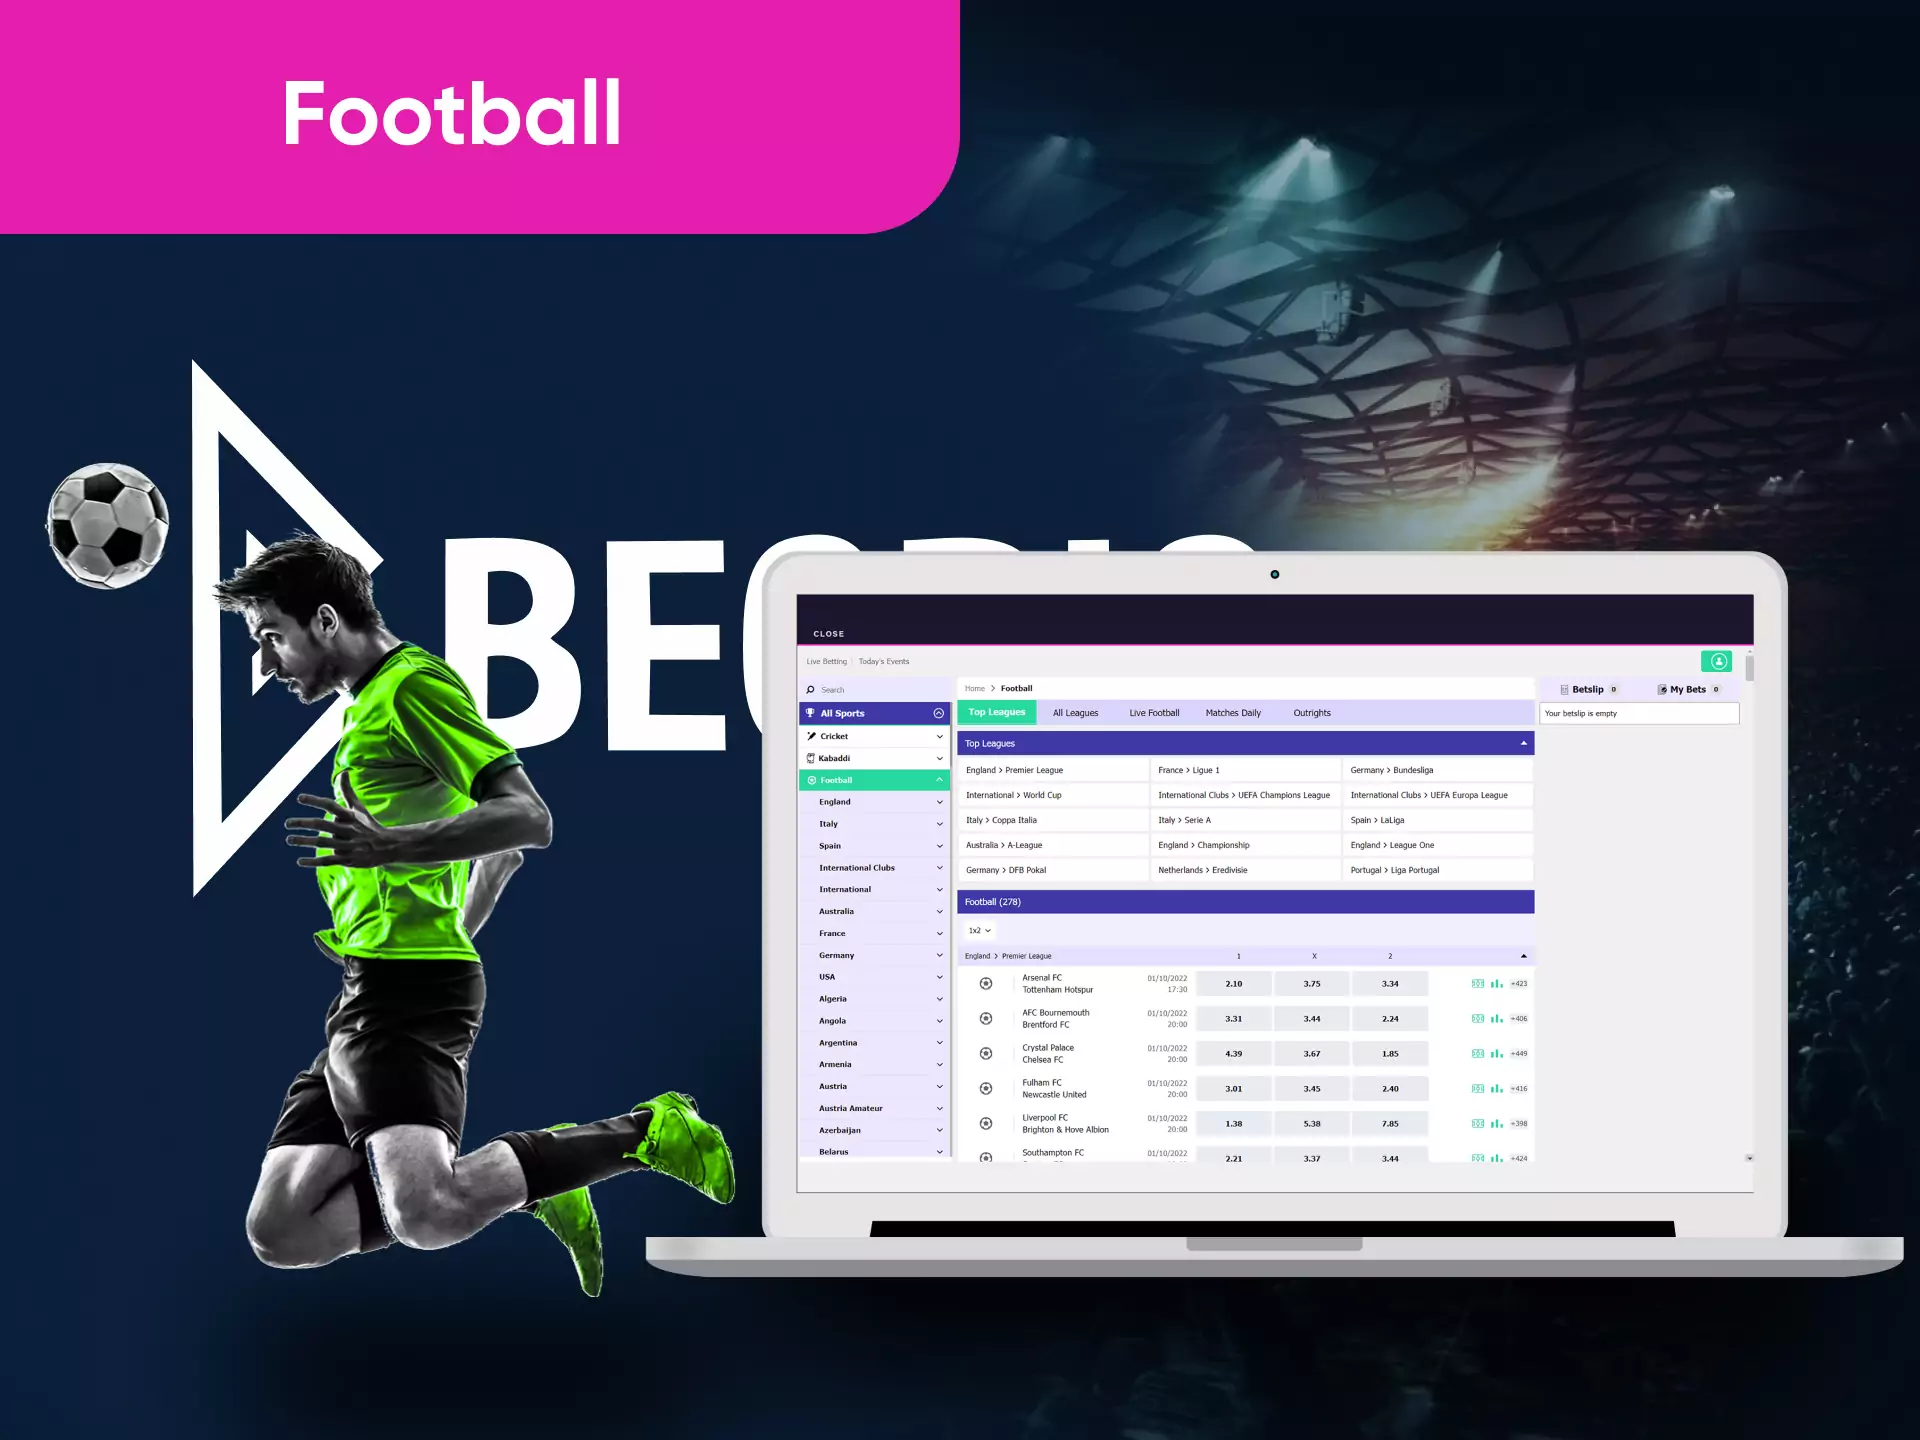 In the Becric sportsbook, users often place bets on football matches.